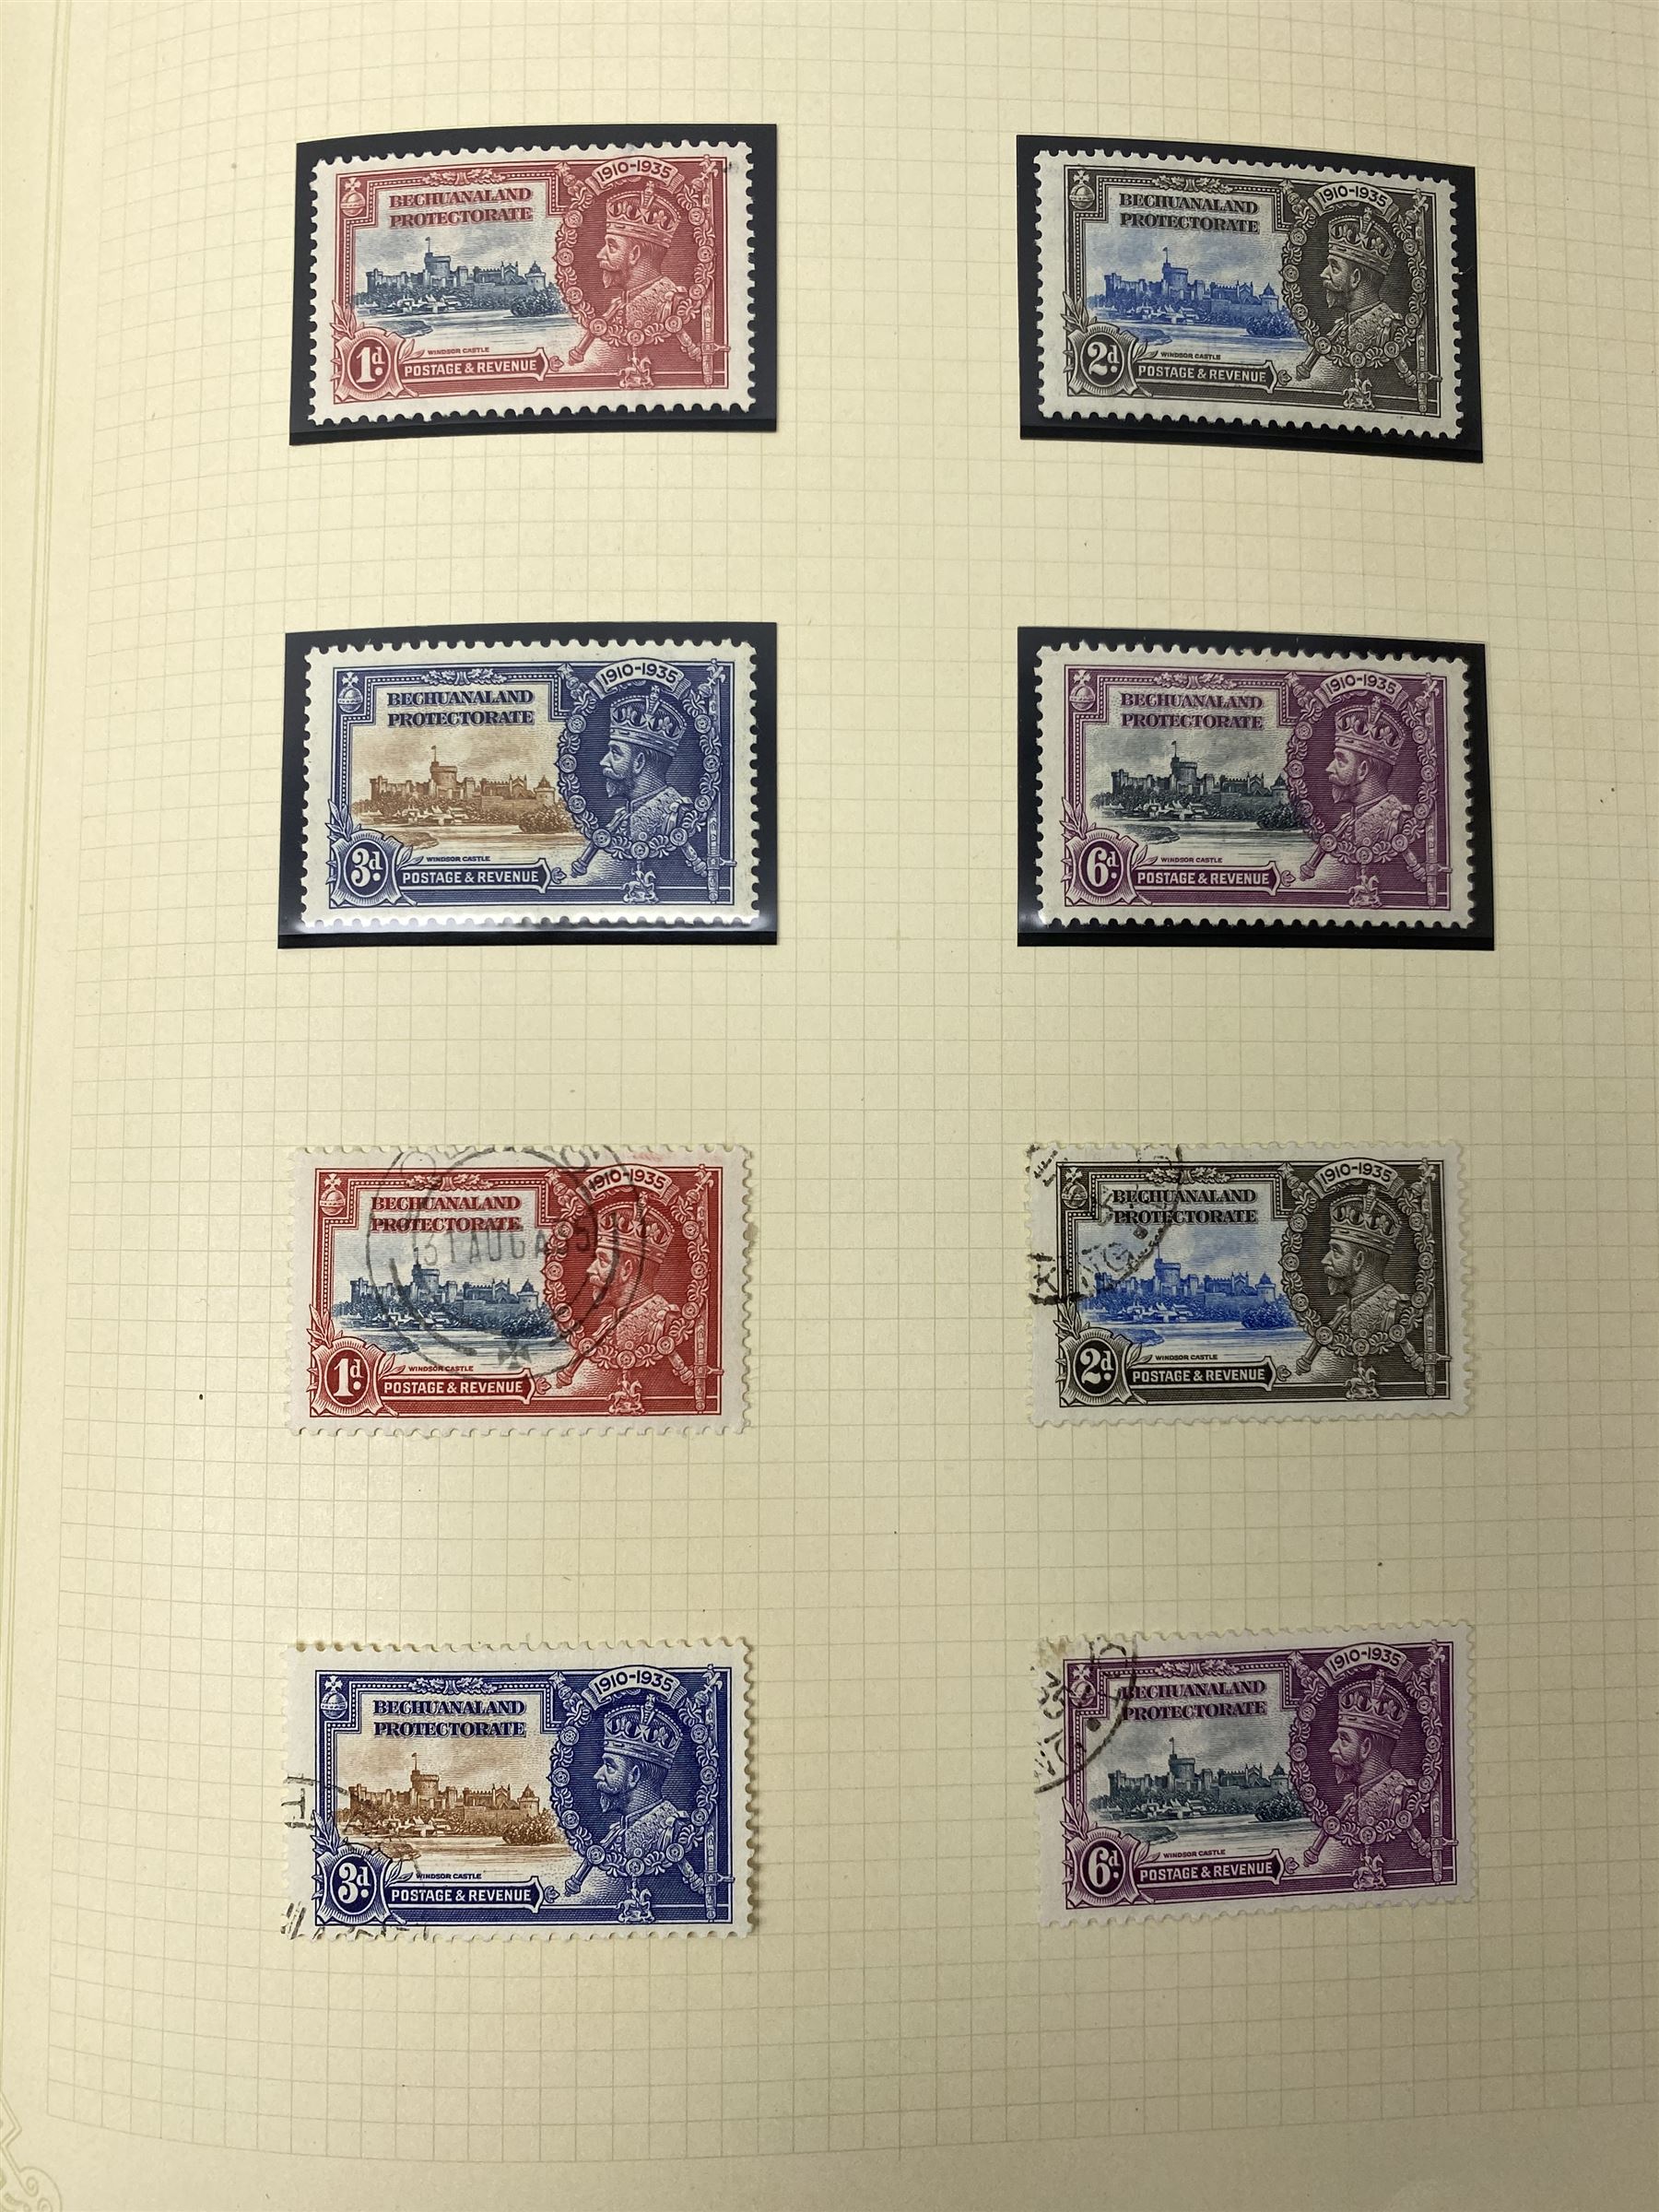 King George V 1935 Silver Jubilee stamps - Image 10 of 17